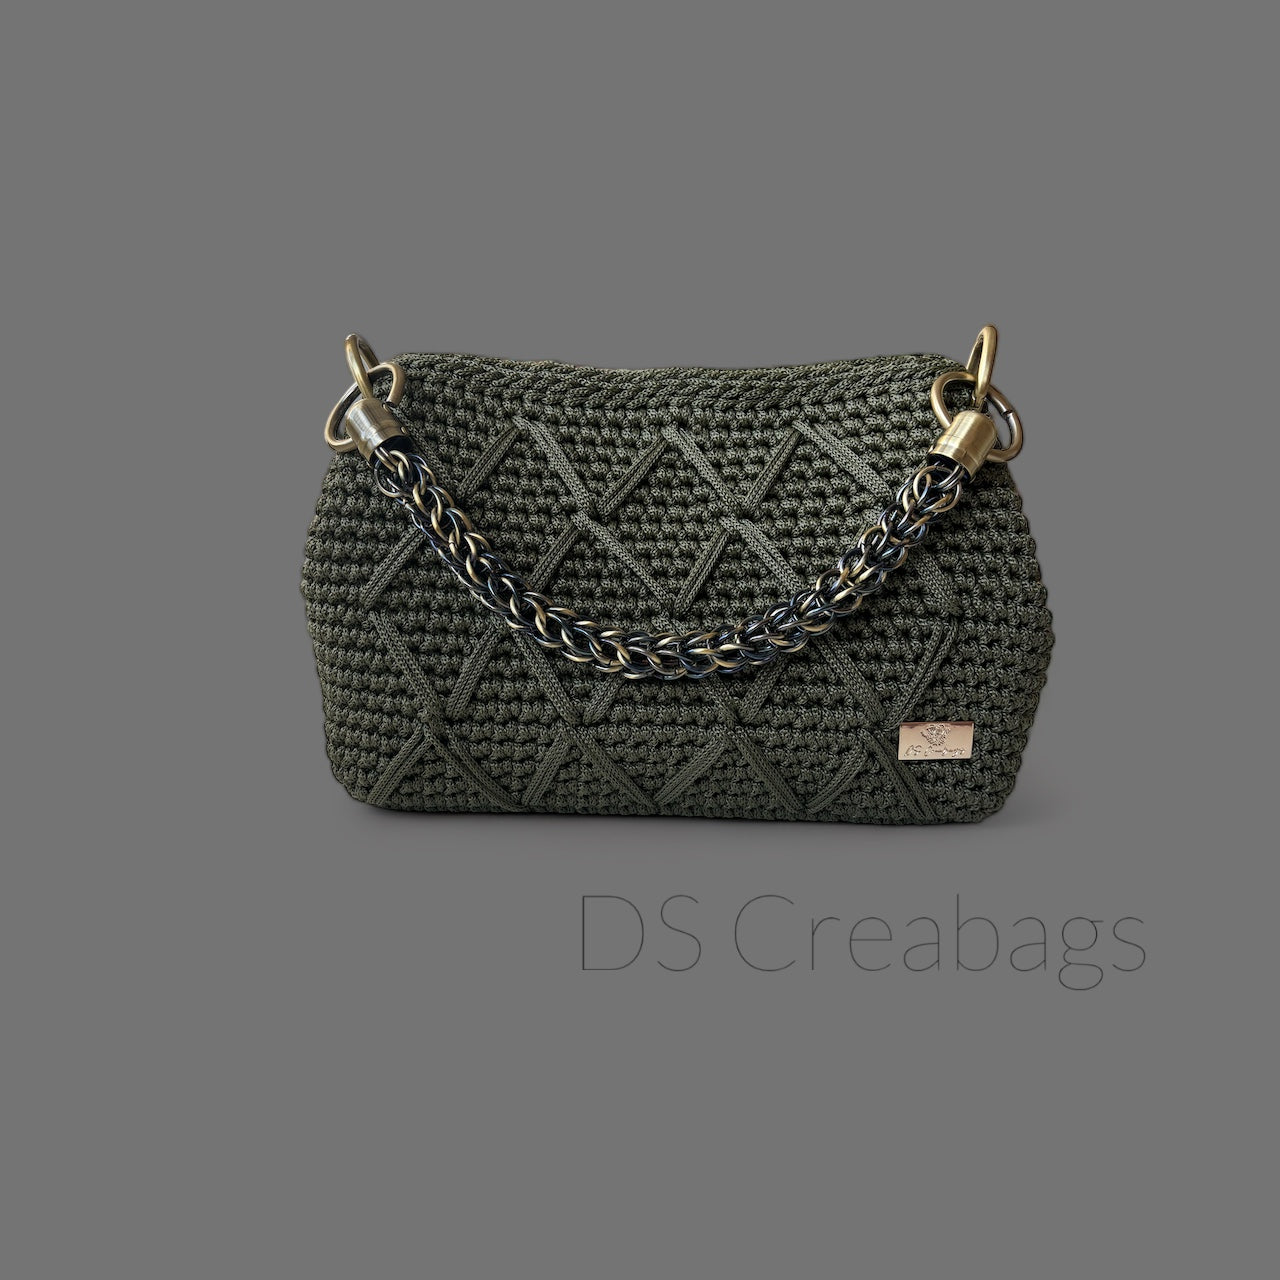 Green clutch with stunning metal chain